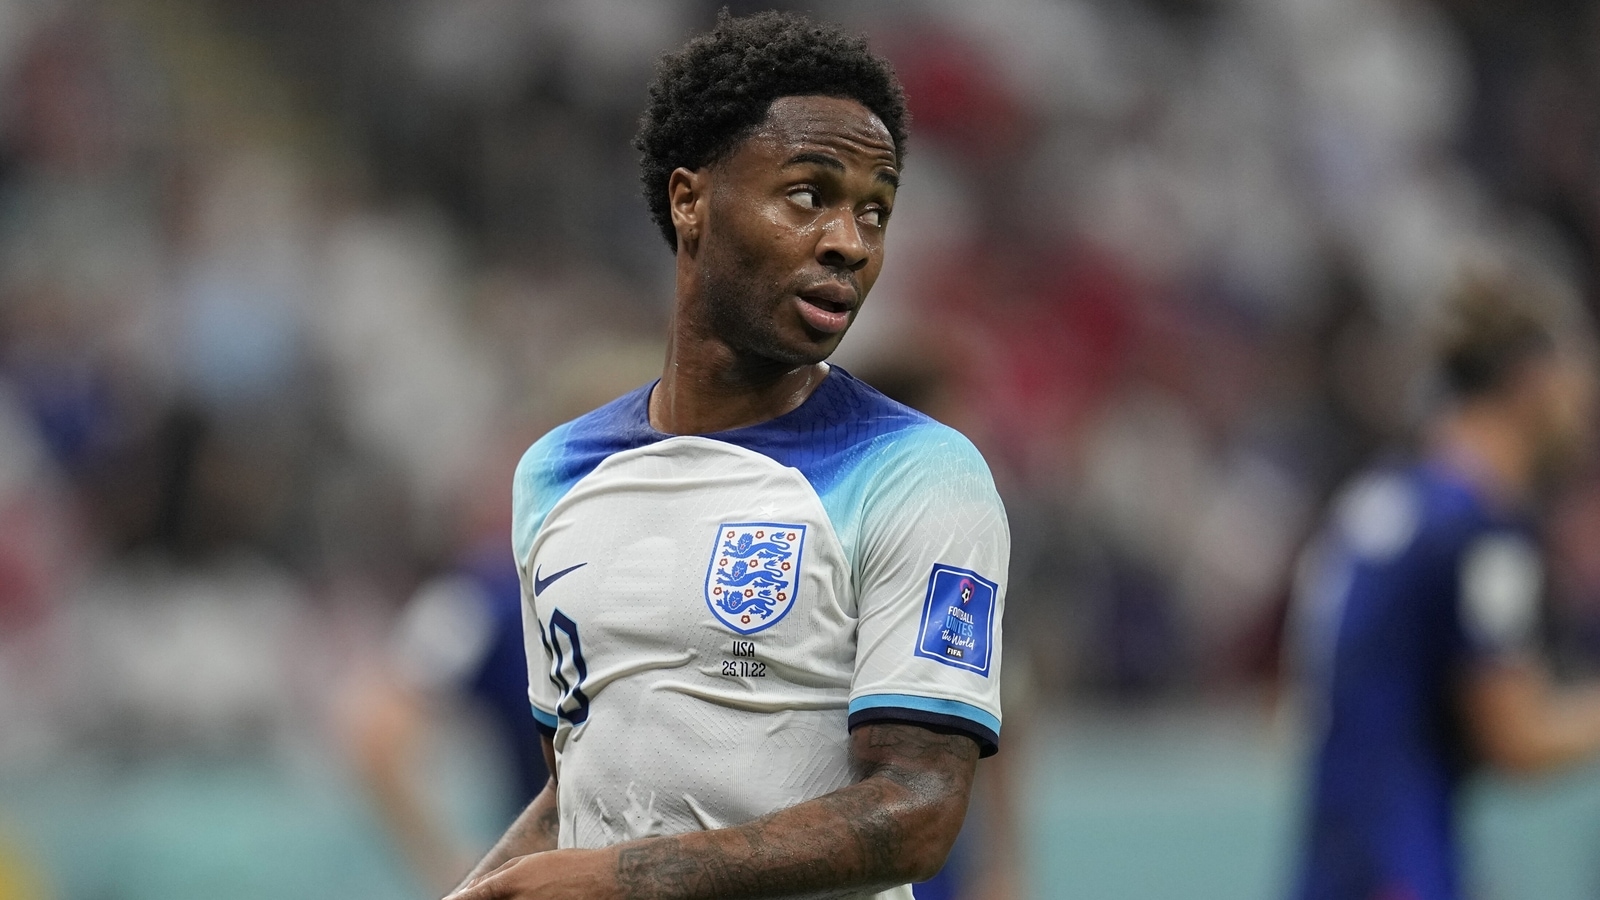 Raheem Sterling heading back to UK amid reports of home intrusion